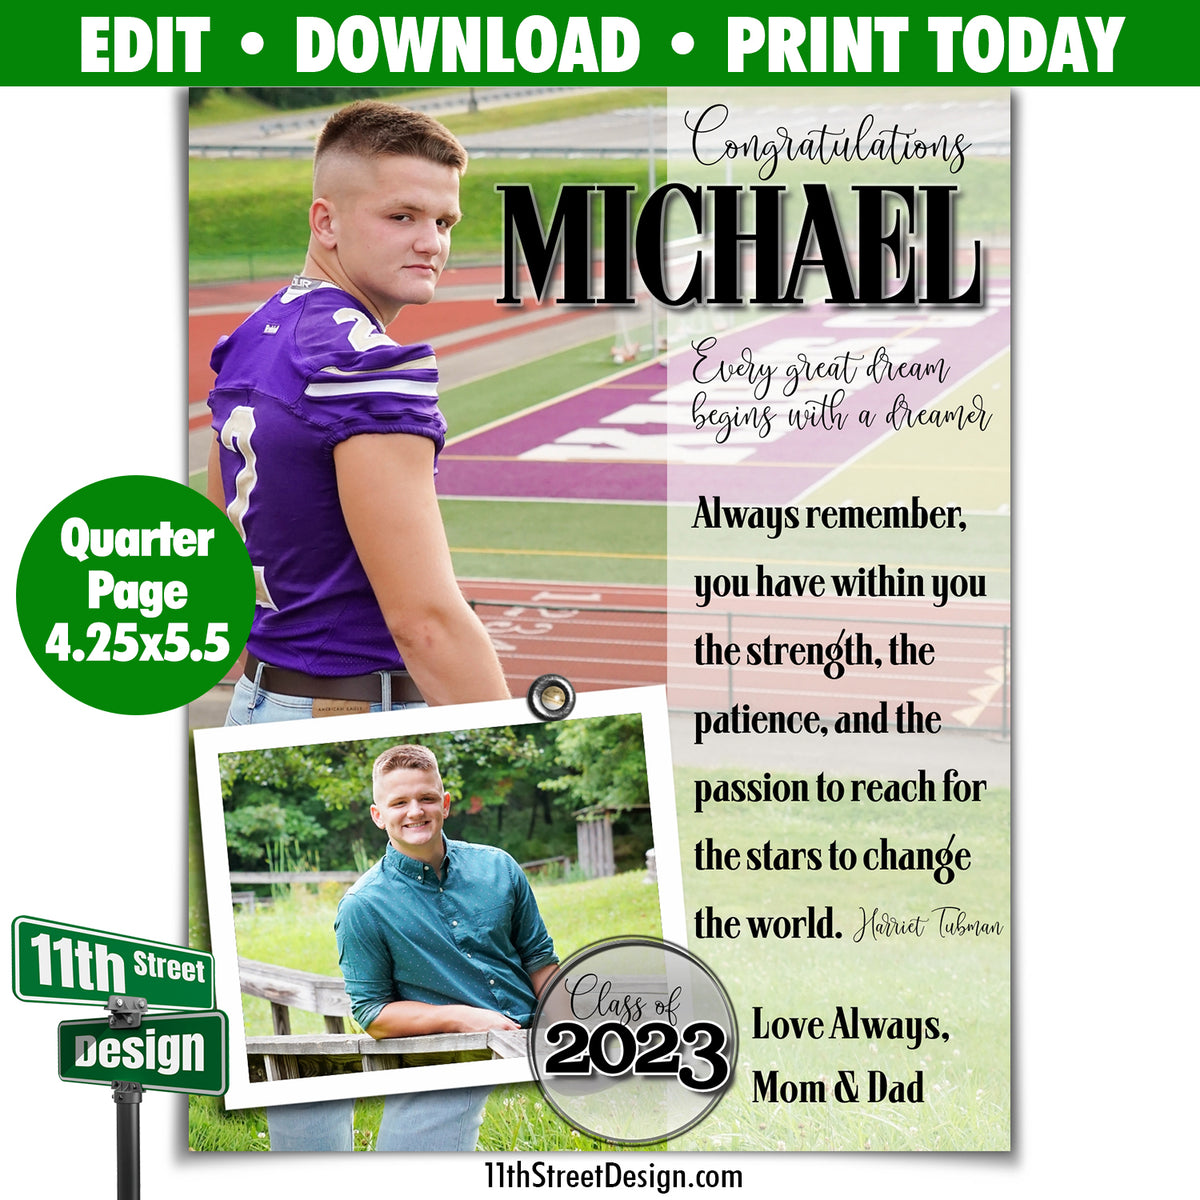 Instant Yearbook Ads • Edit Now Print Today! • Sports Program Recognition Ad Template • Edit Online • Digital Download • Hot Shots